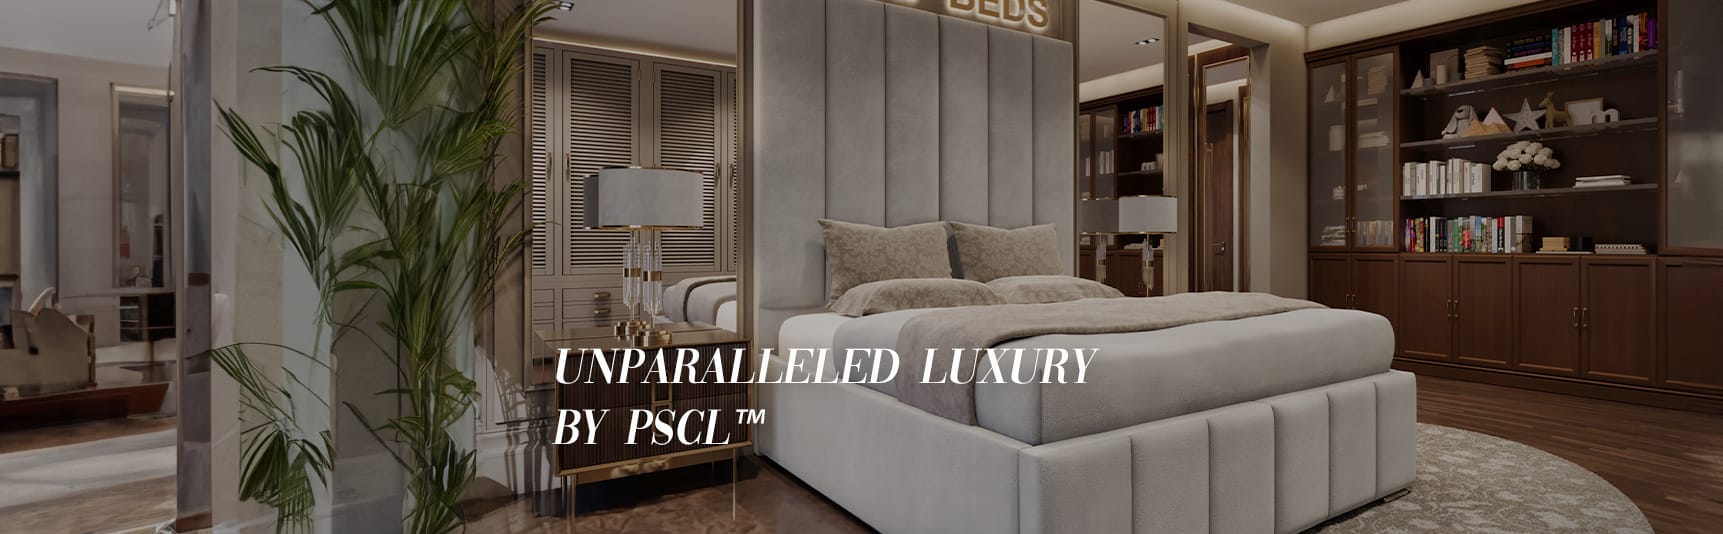 UNPARALLEDED LUXURY BEDS PSCL